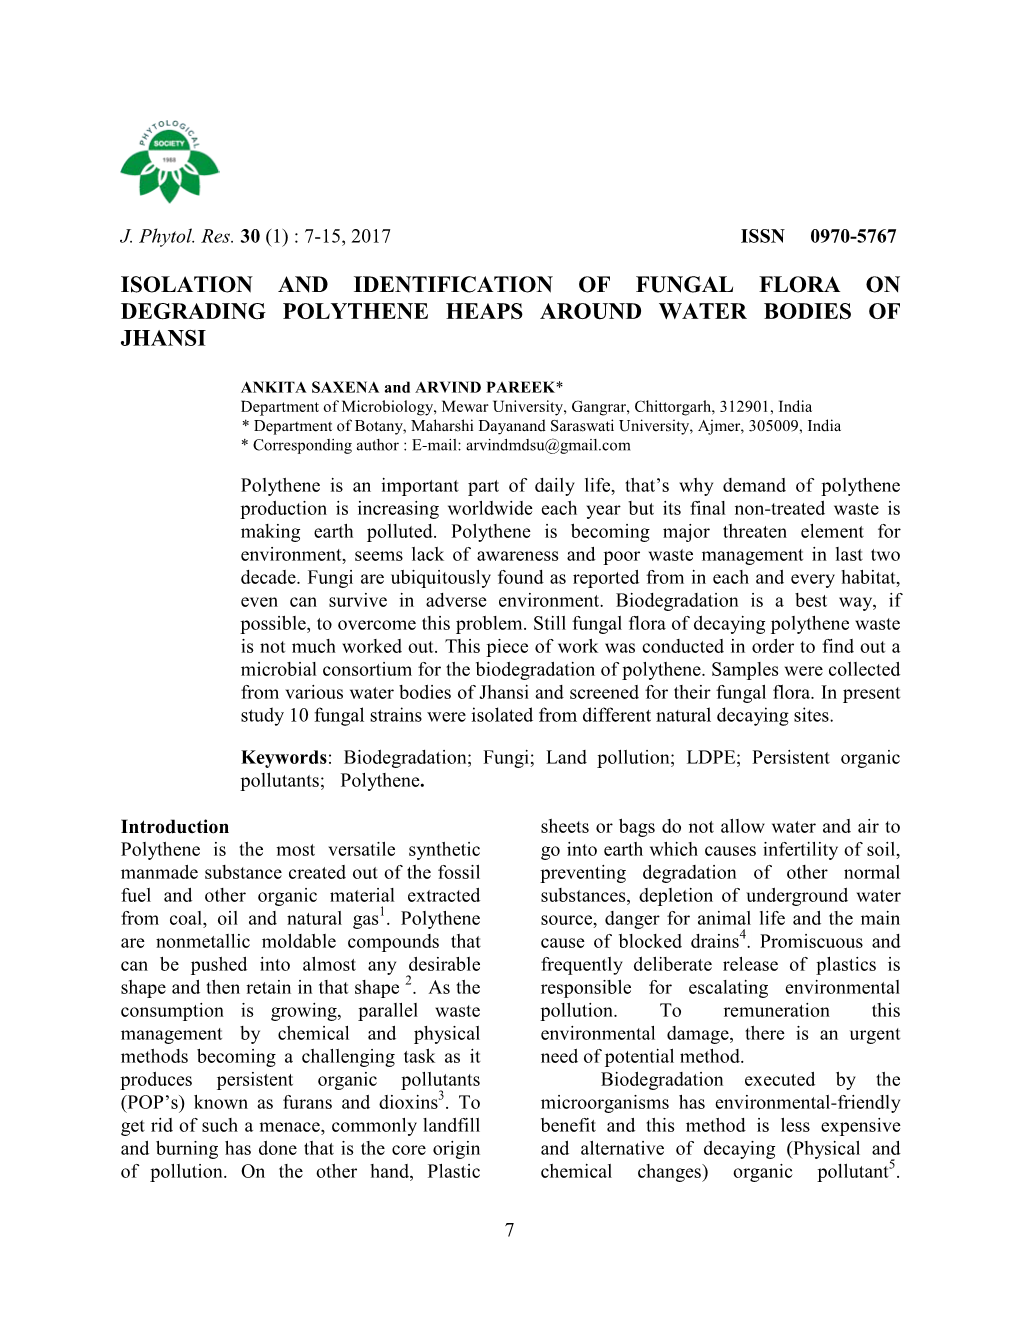 Isolation and Identification of Fungal Flora on Degrading Polythene Heaps Around Water Bodies of Jhansi